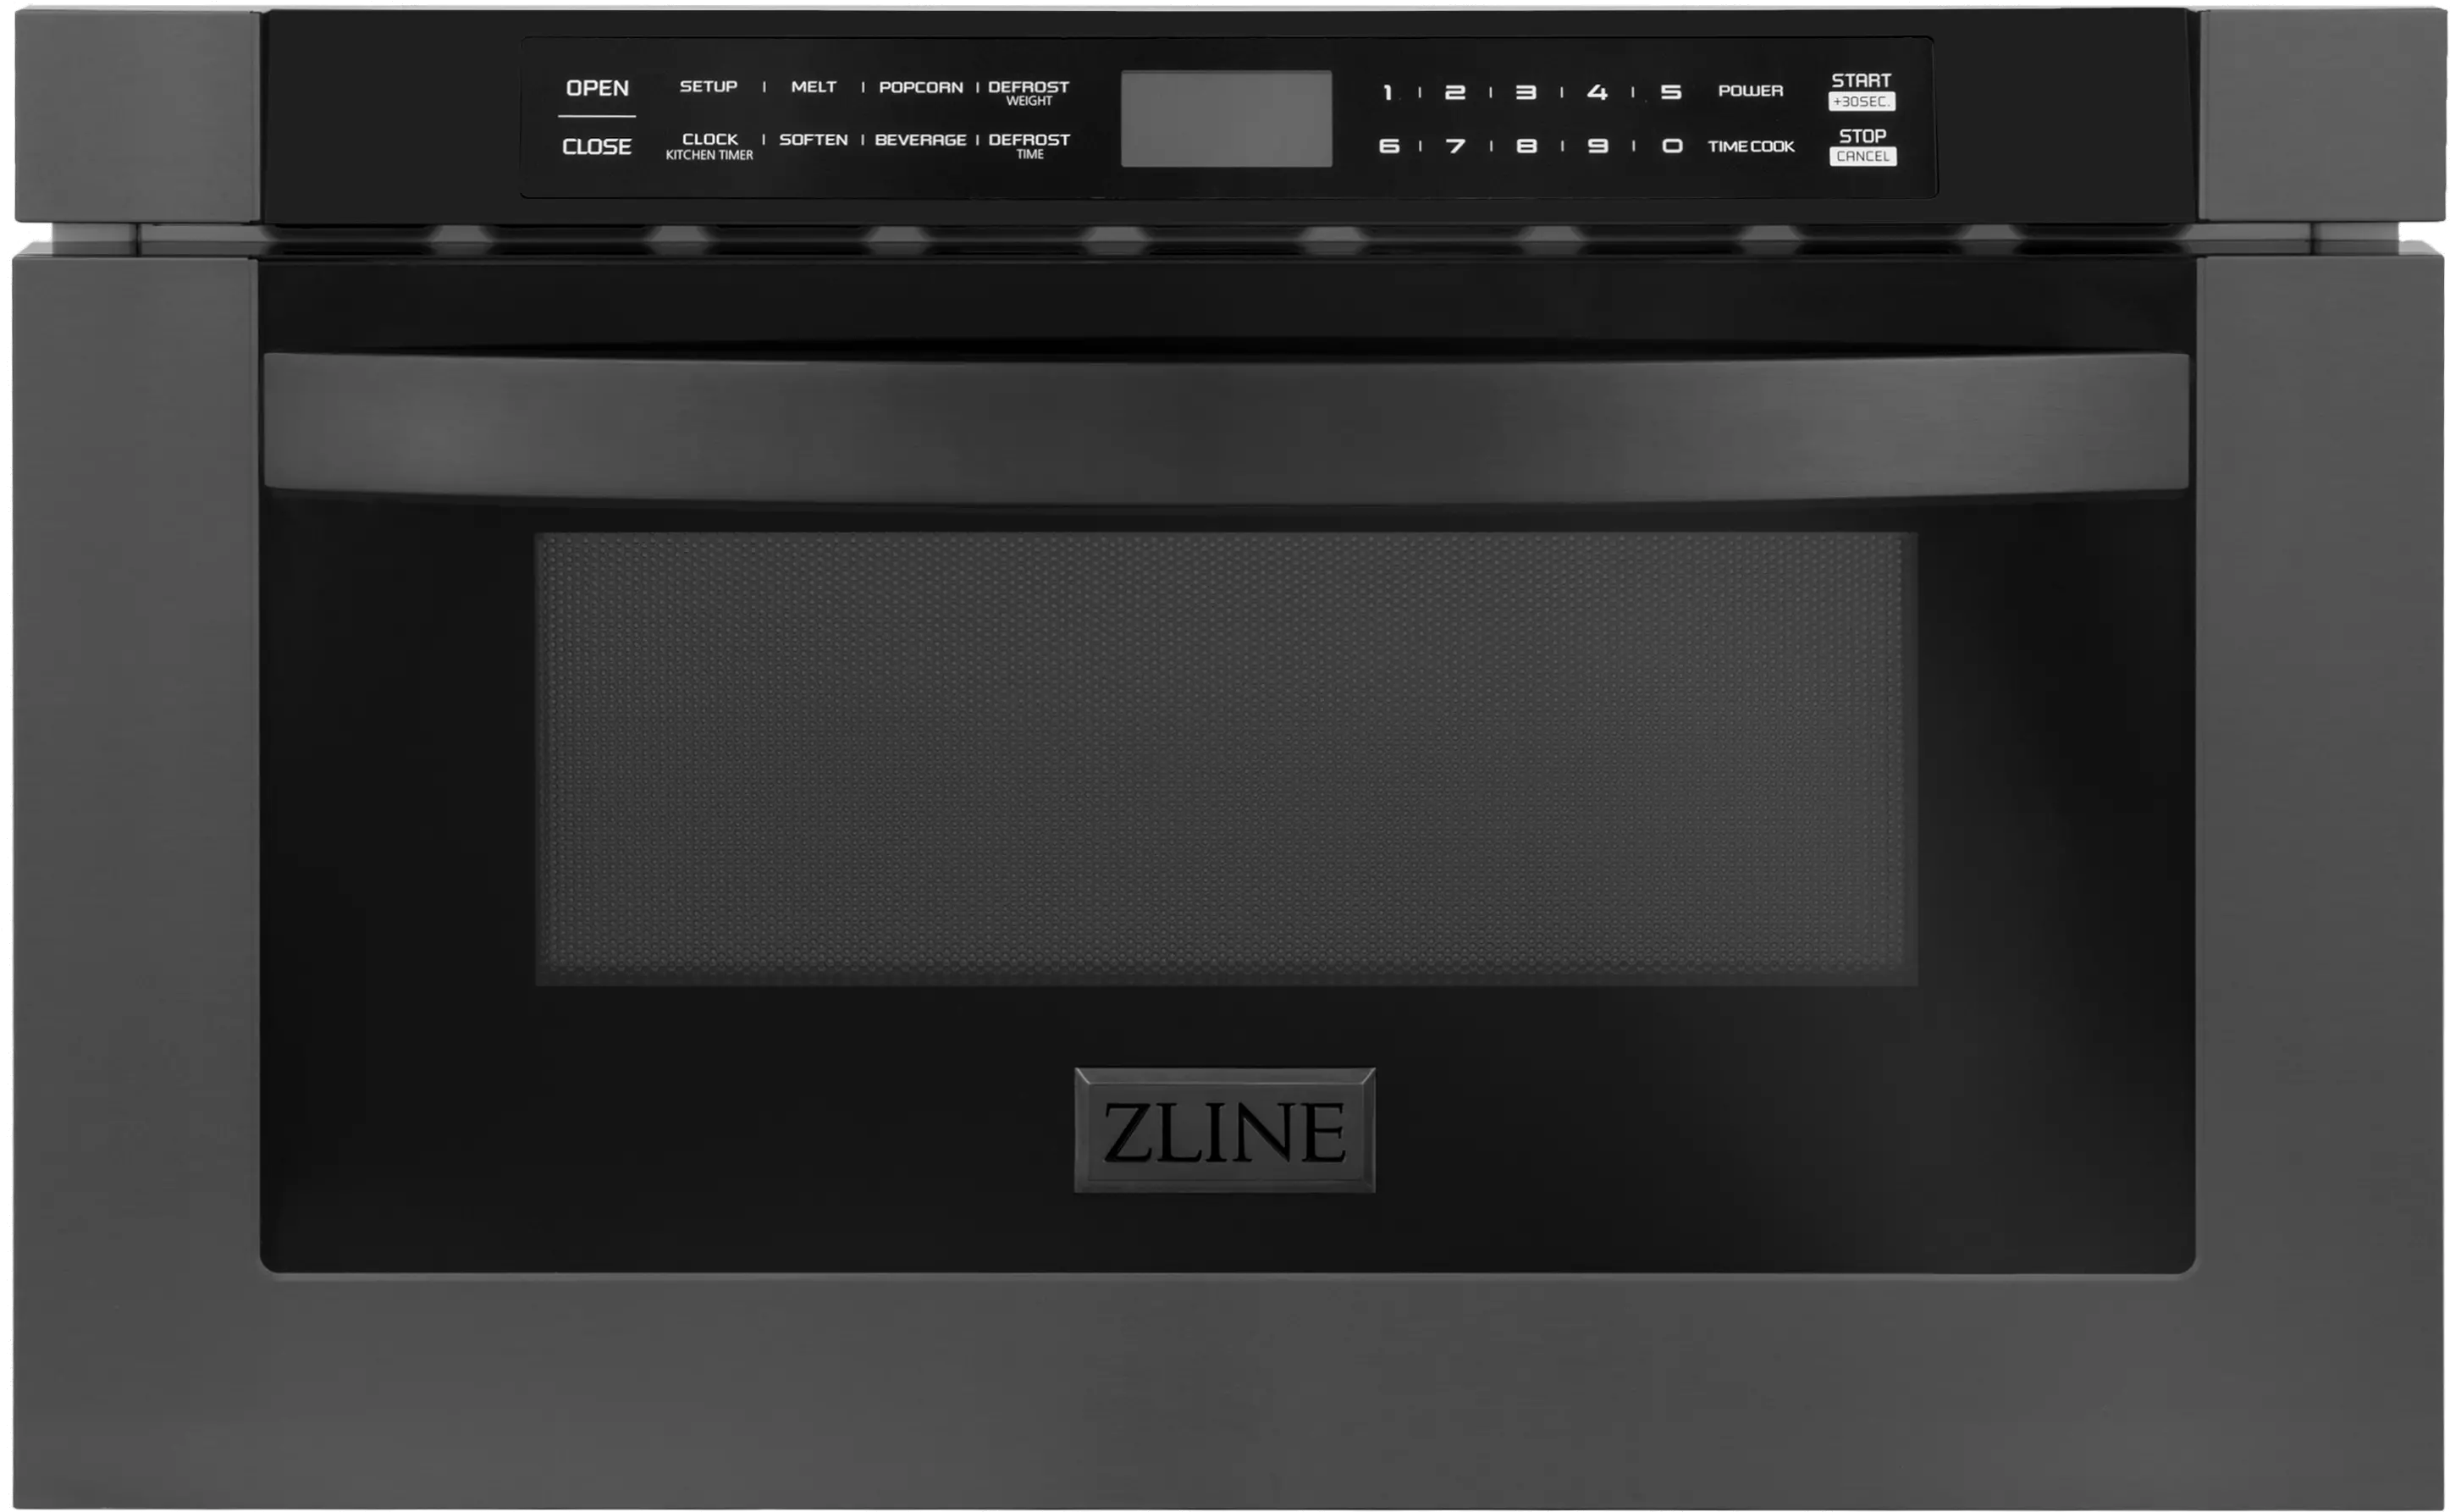 Cafe 24 in. 1.2 cu. ft. Microwave Drawer with 10 Power Levels